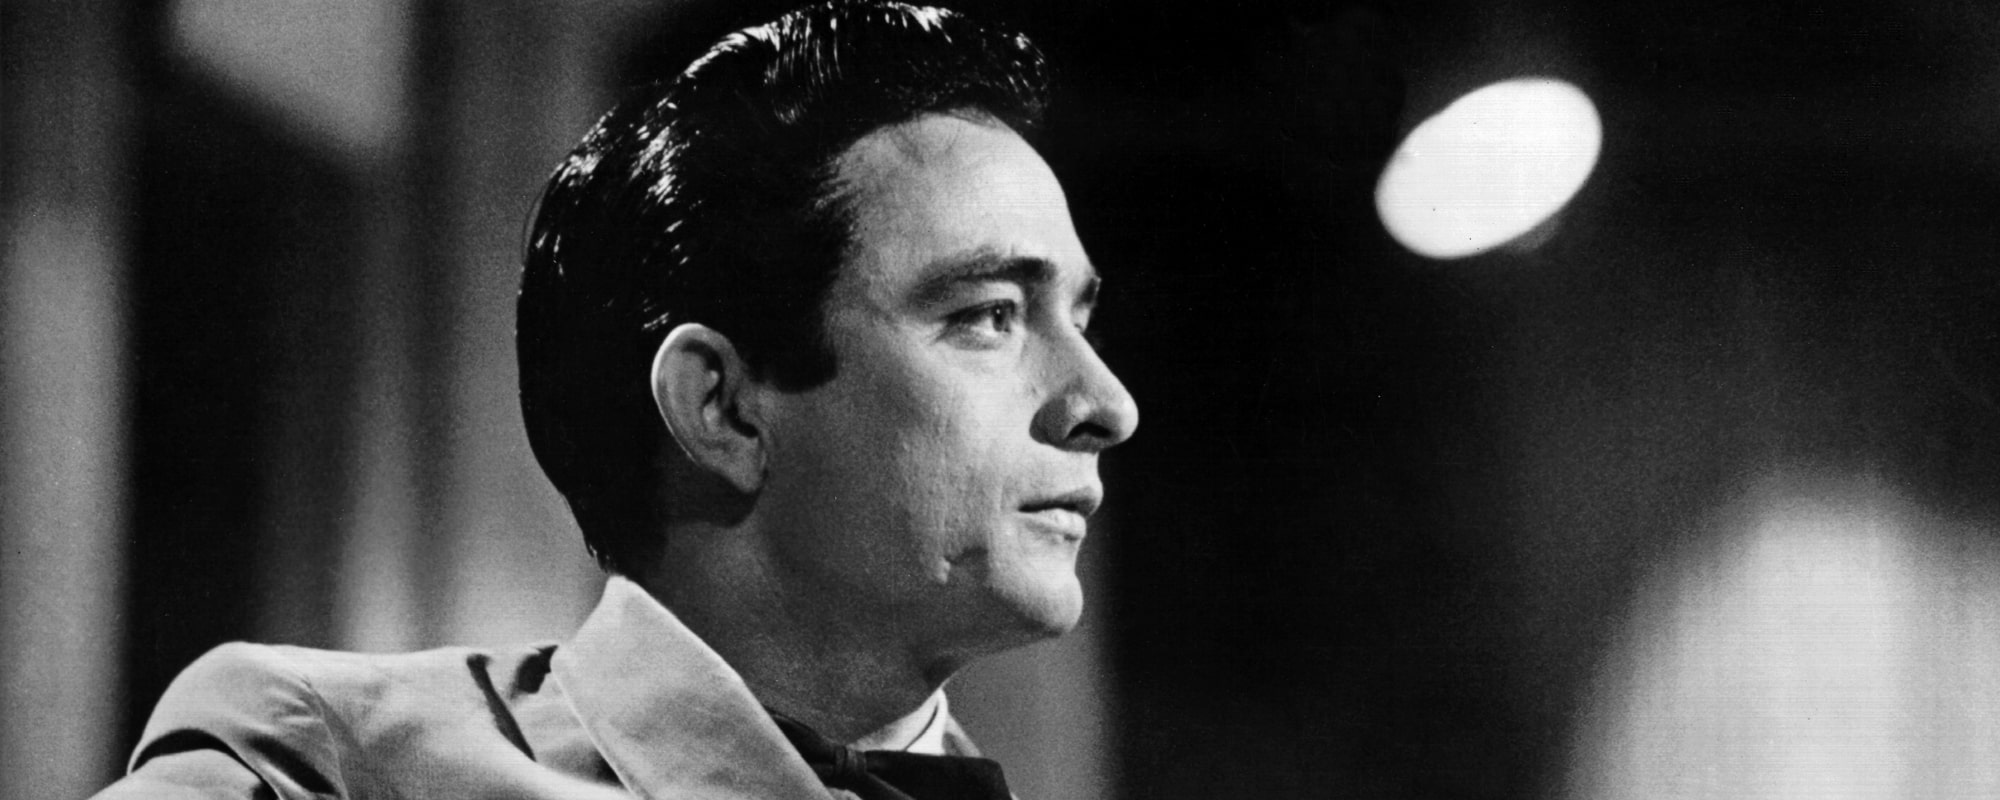 Johnny Cash Released His First No. 1 Single “I Walk the Line” on This Day in 1956